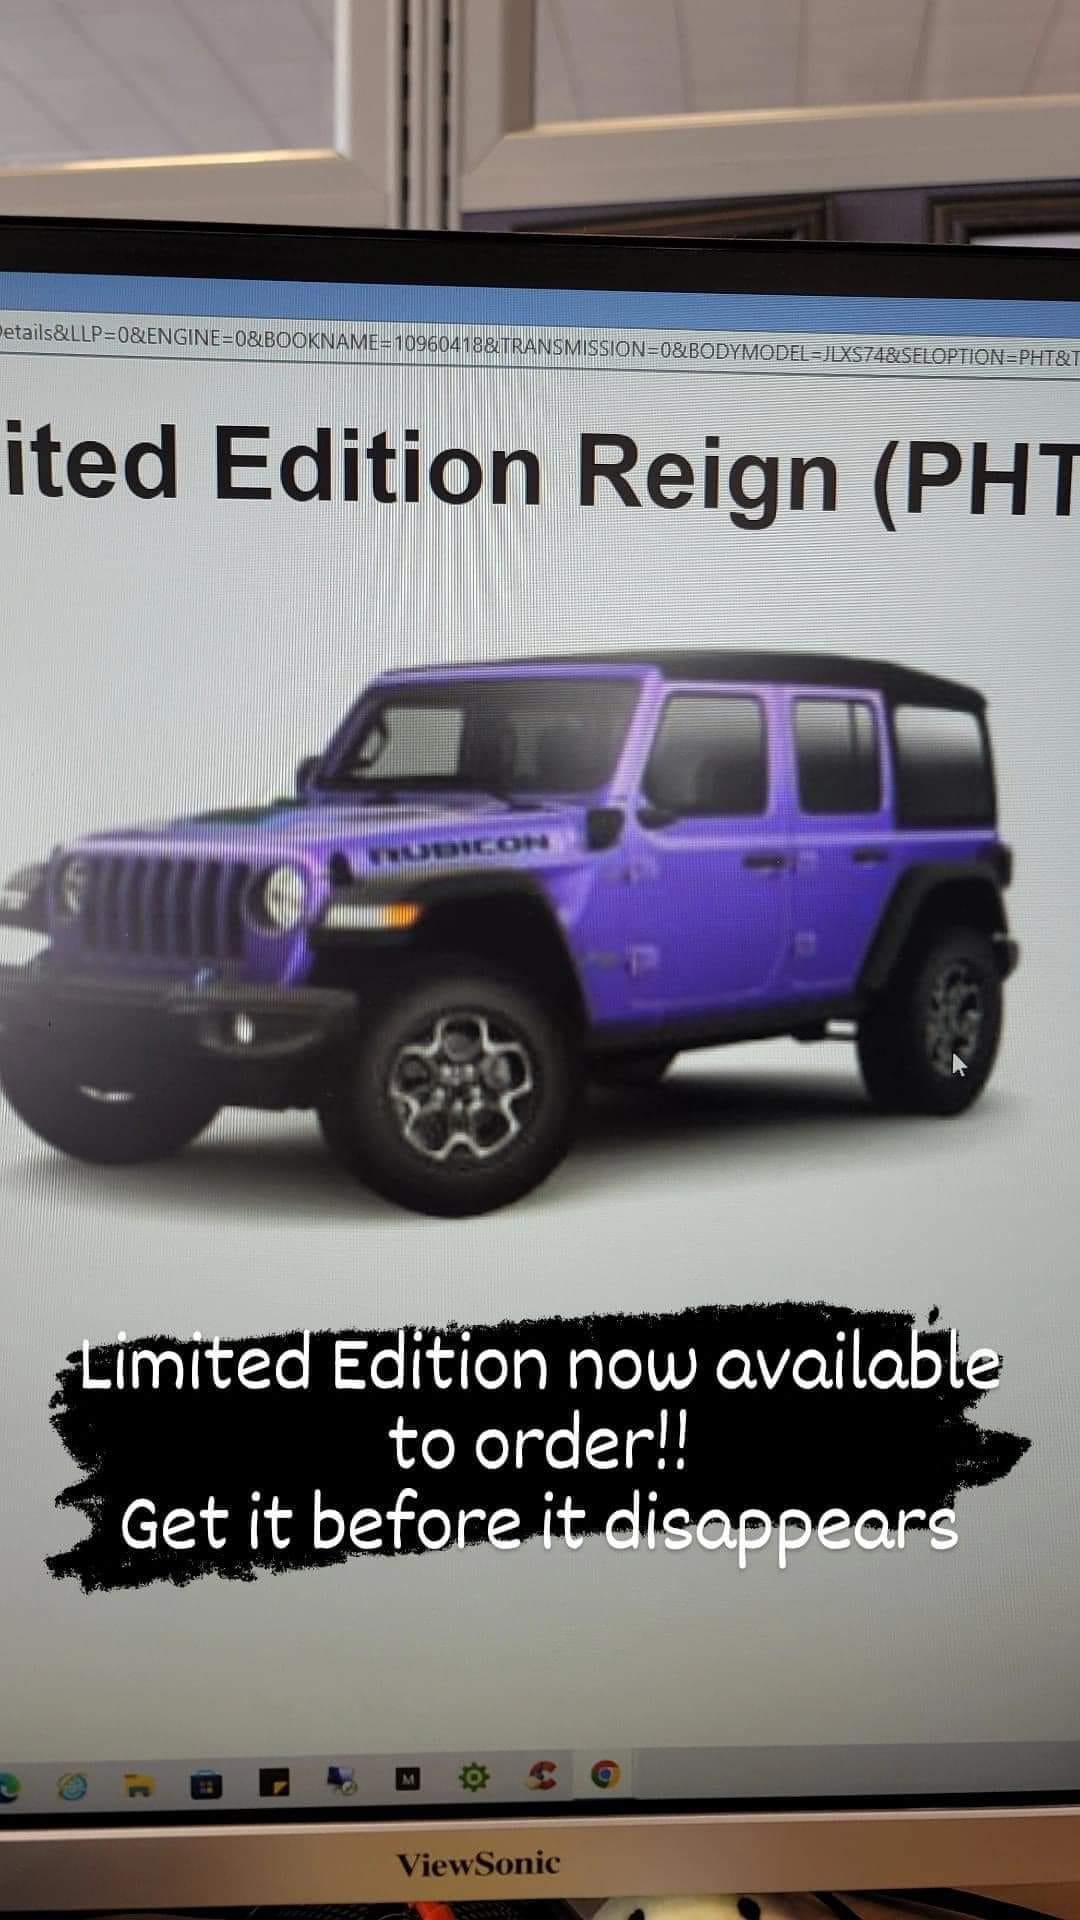 Jeep Officially Has A New Purple Jeep and You Can Pre-order It Now